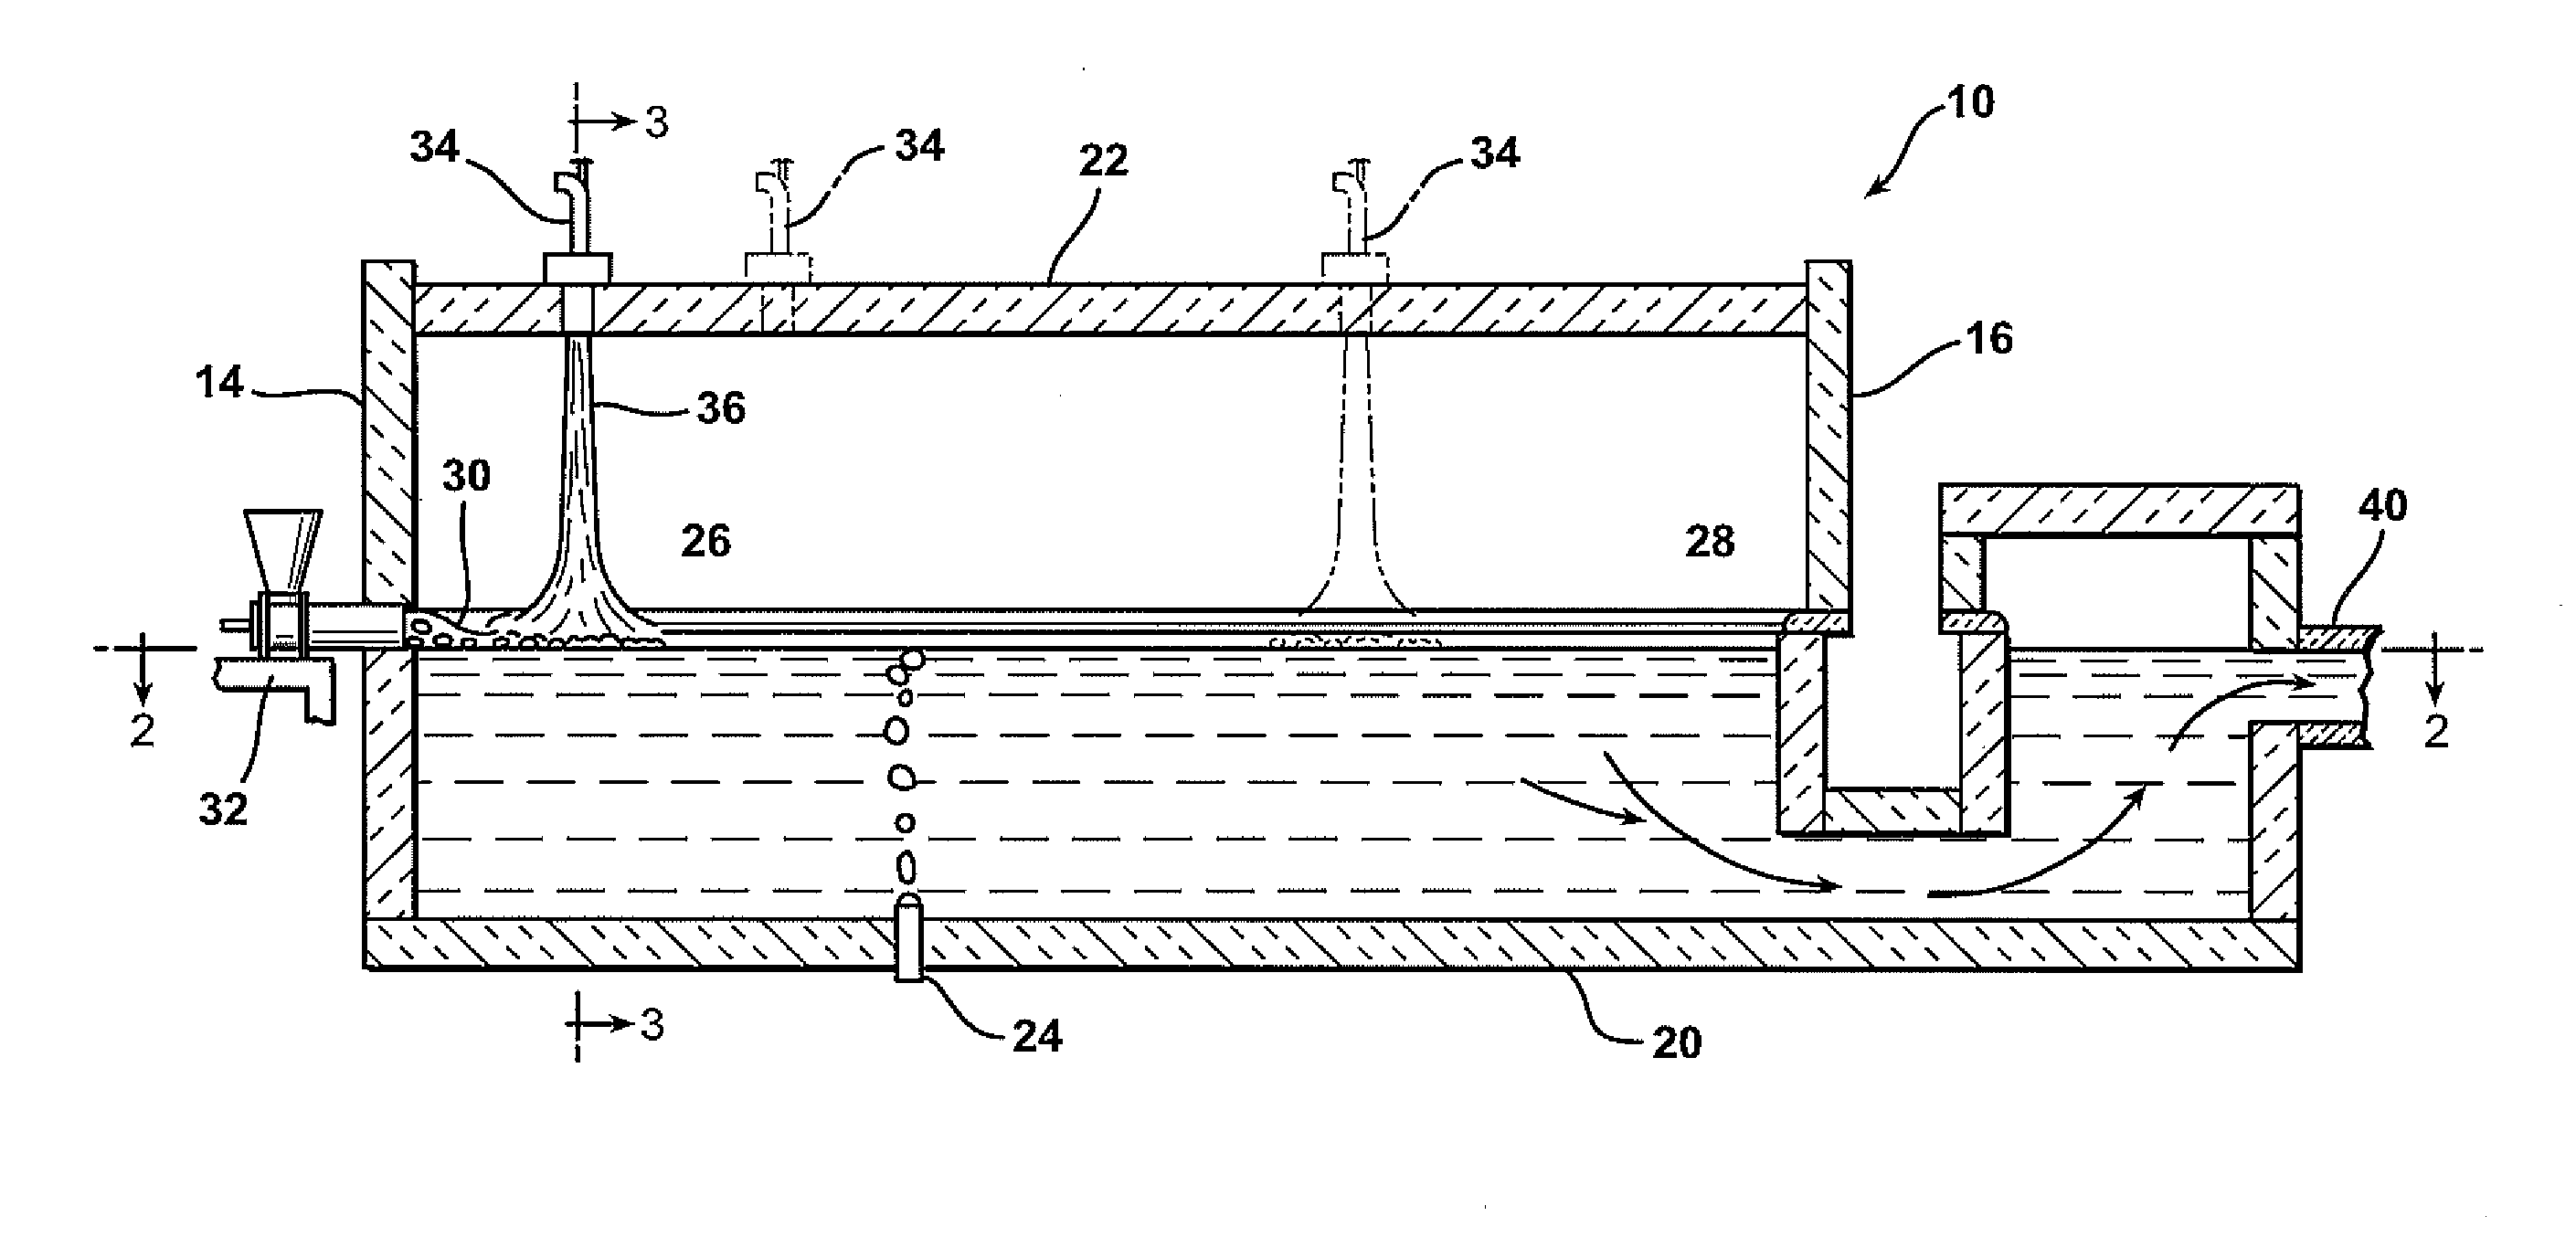 Method of manufacturing high strength glass fibers in a direct melt operation and products formed there from